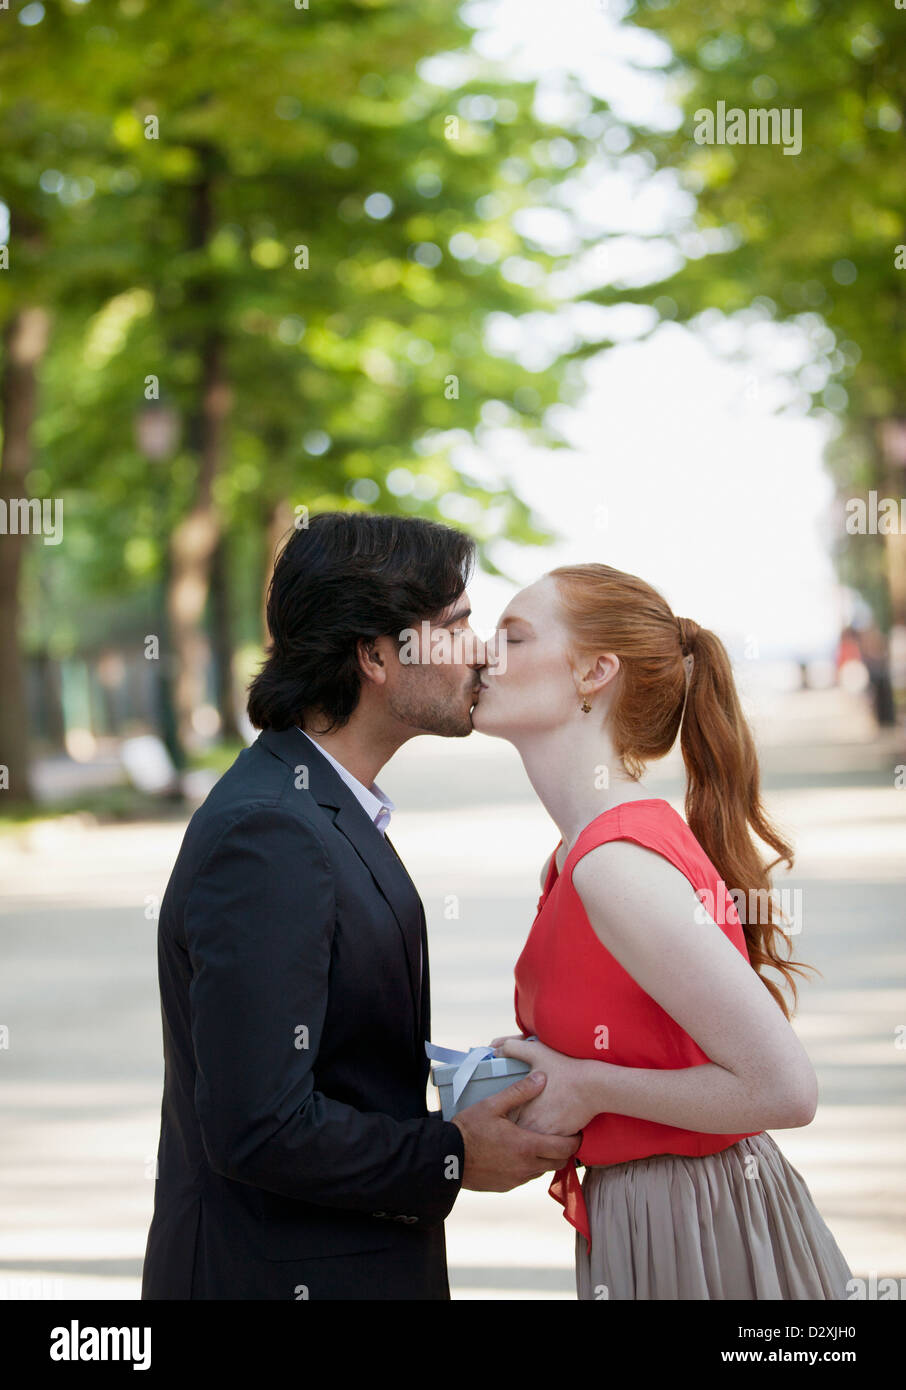 Couple kissing in park Stock Photo